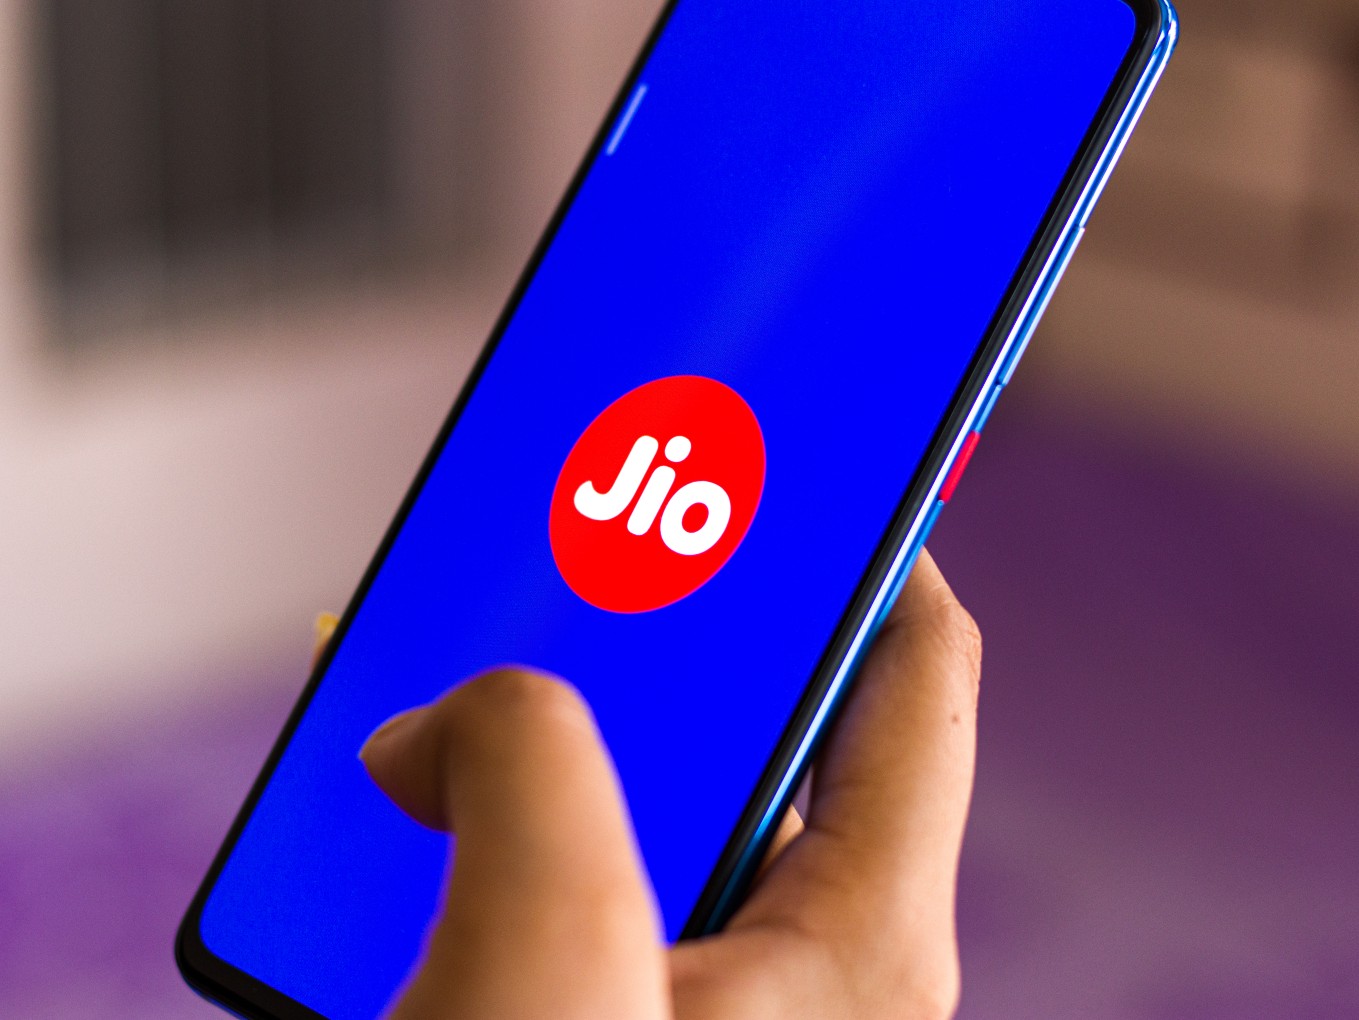 Reliance Jio To Get $600 Mn From TPG To Develop Digital Society